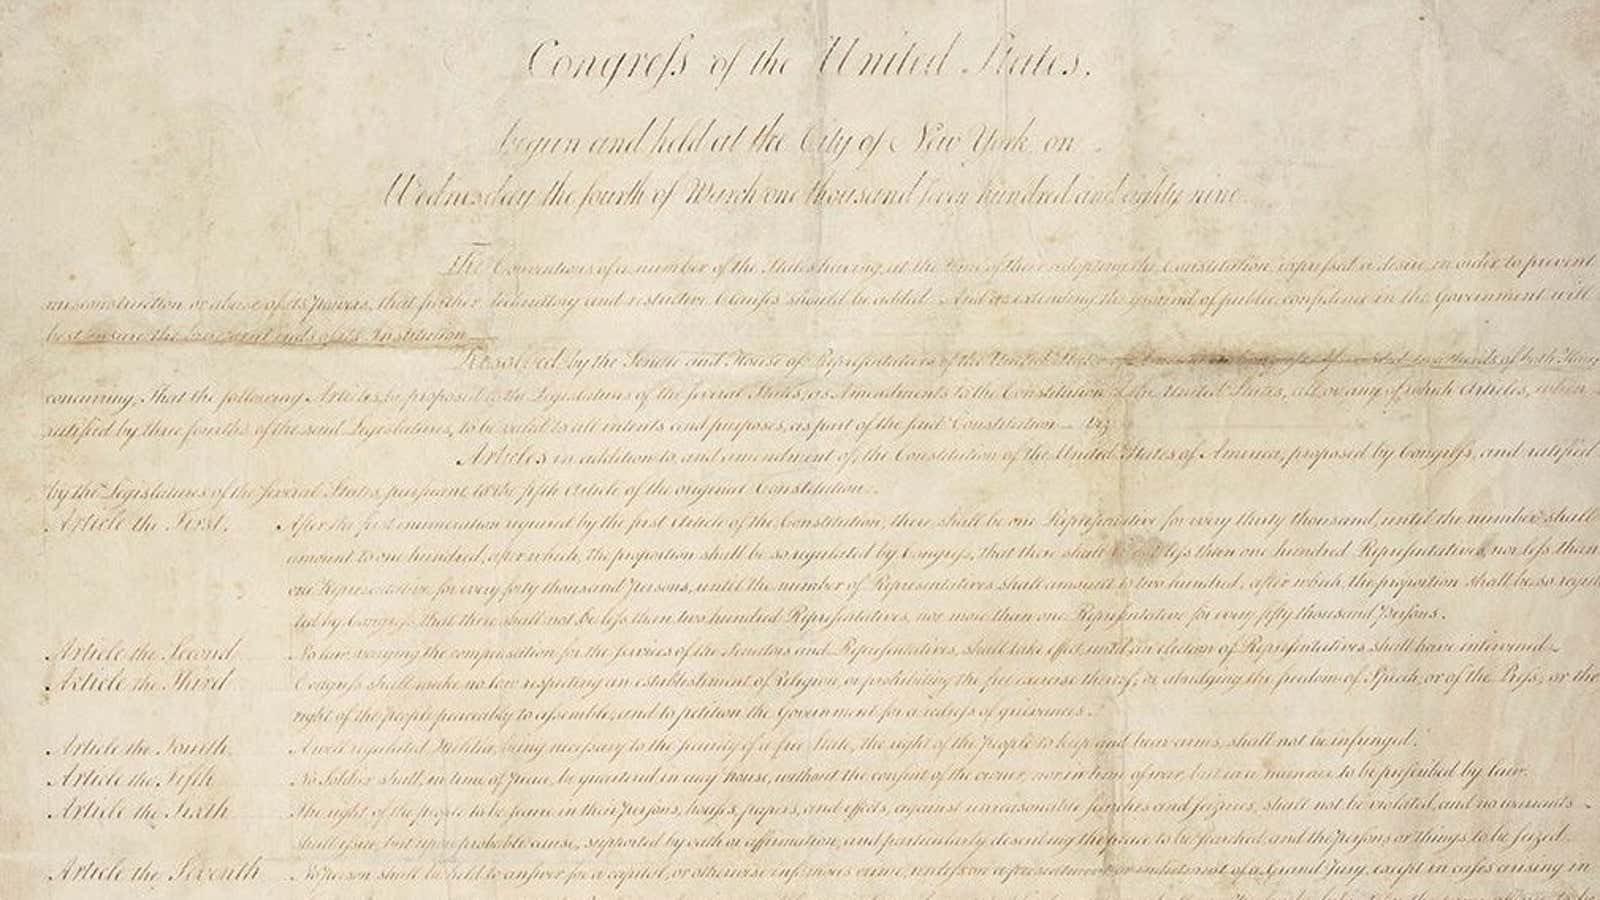 The first Bill of Rights